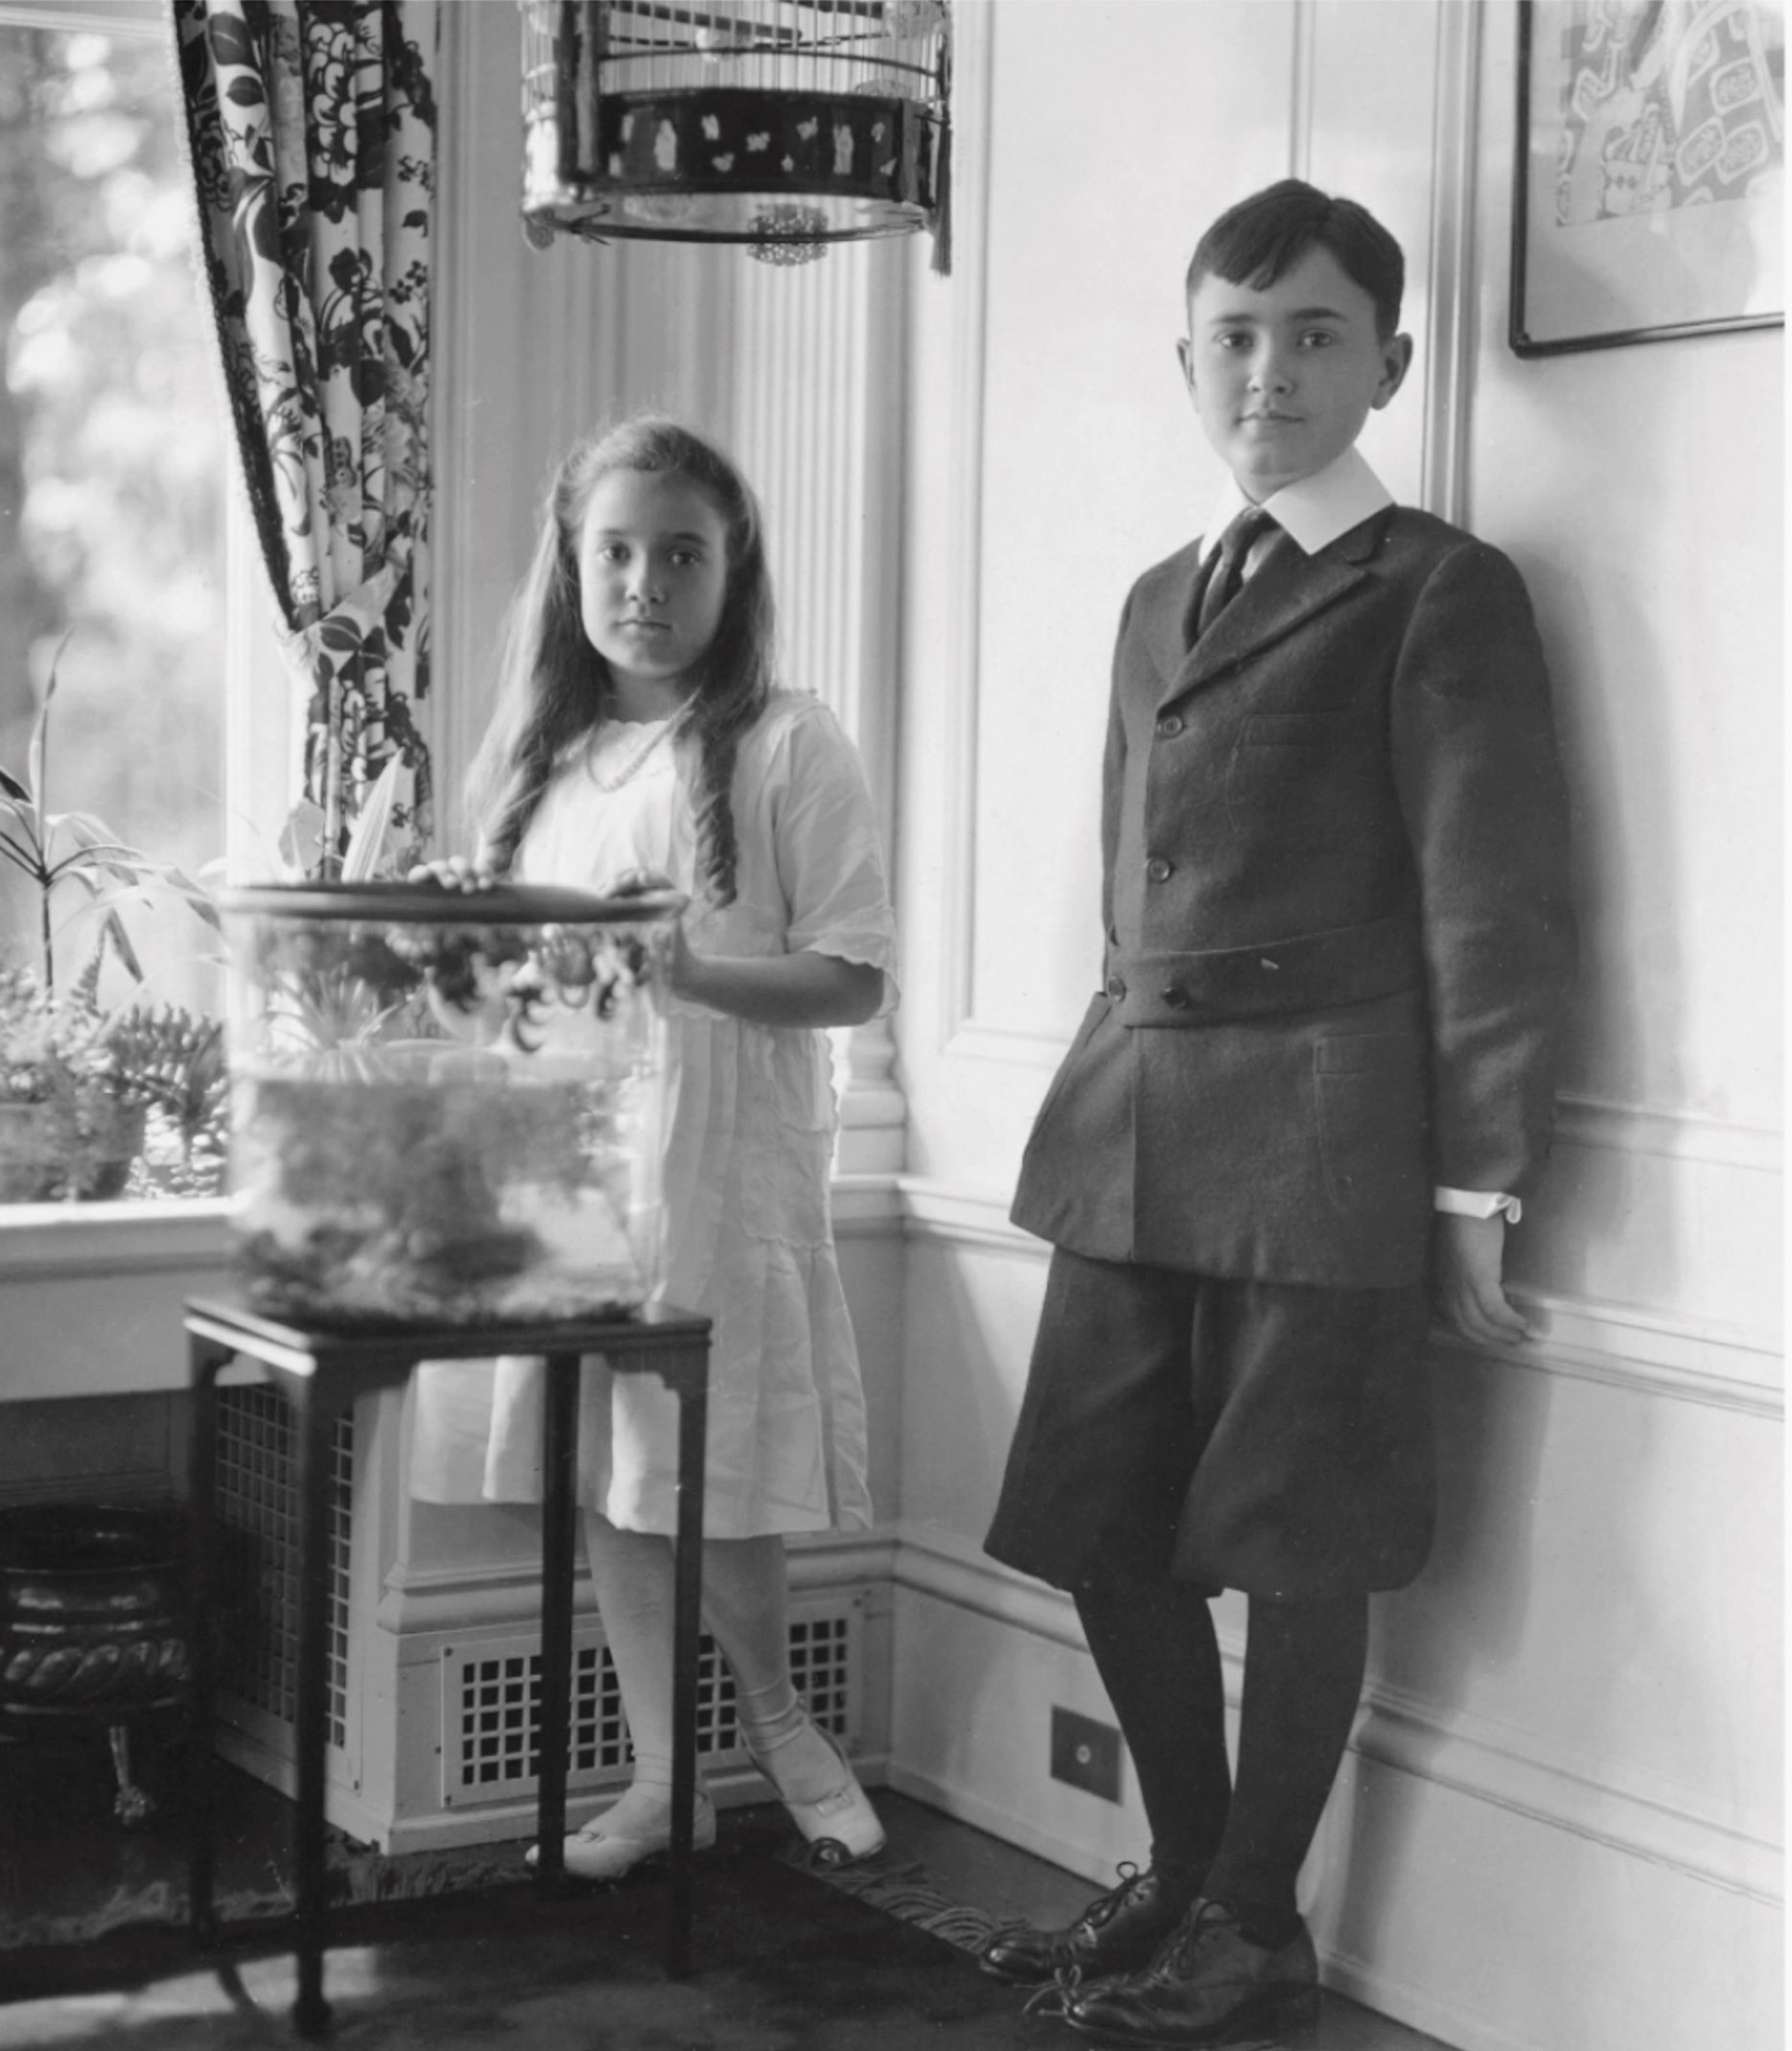 Portrait of Philip and his sister, Theodate, likely in their childhood home, New London, Ohio, as reproduced in Philip Johnson: A Visual Biography